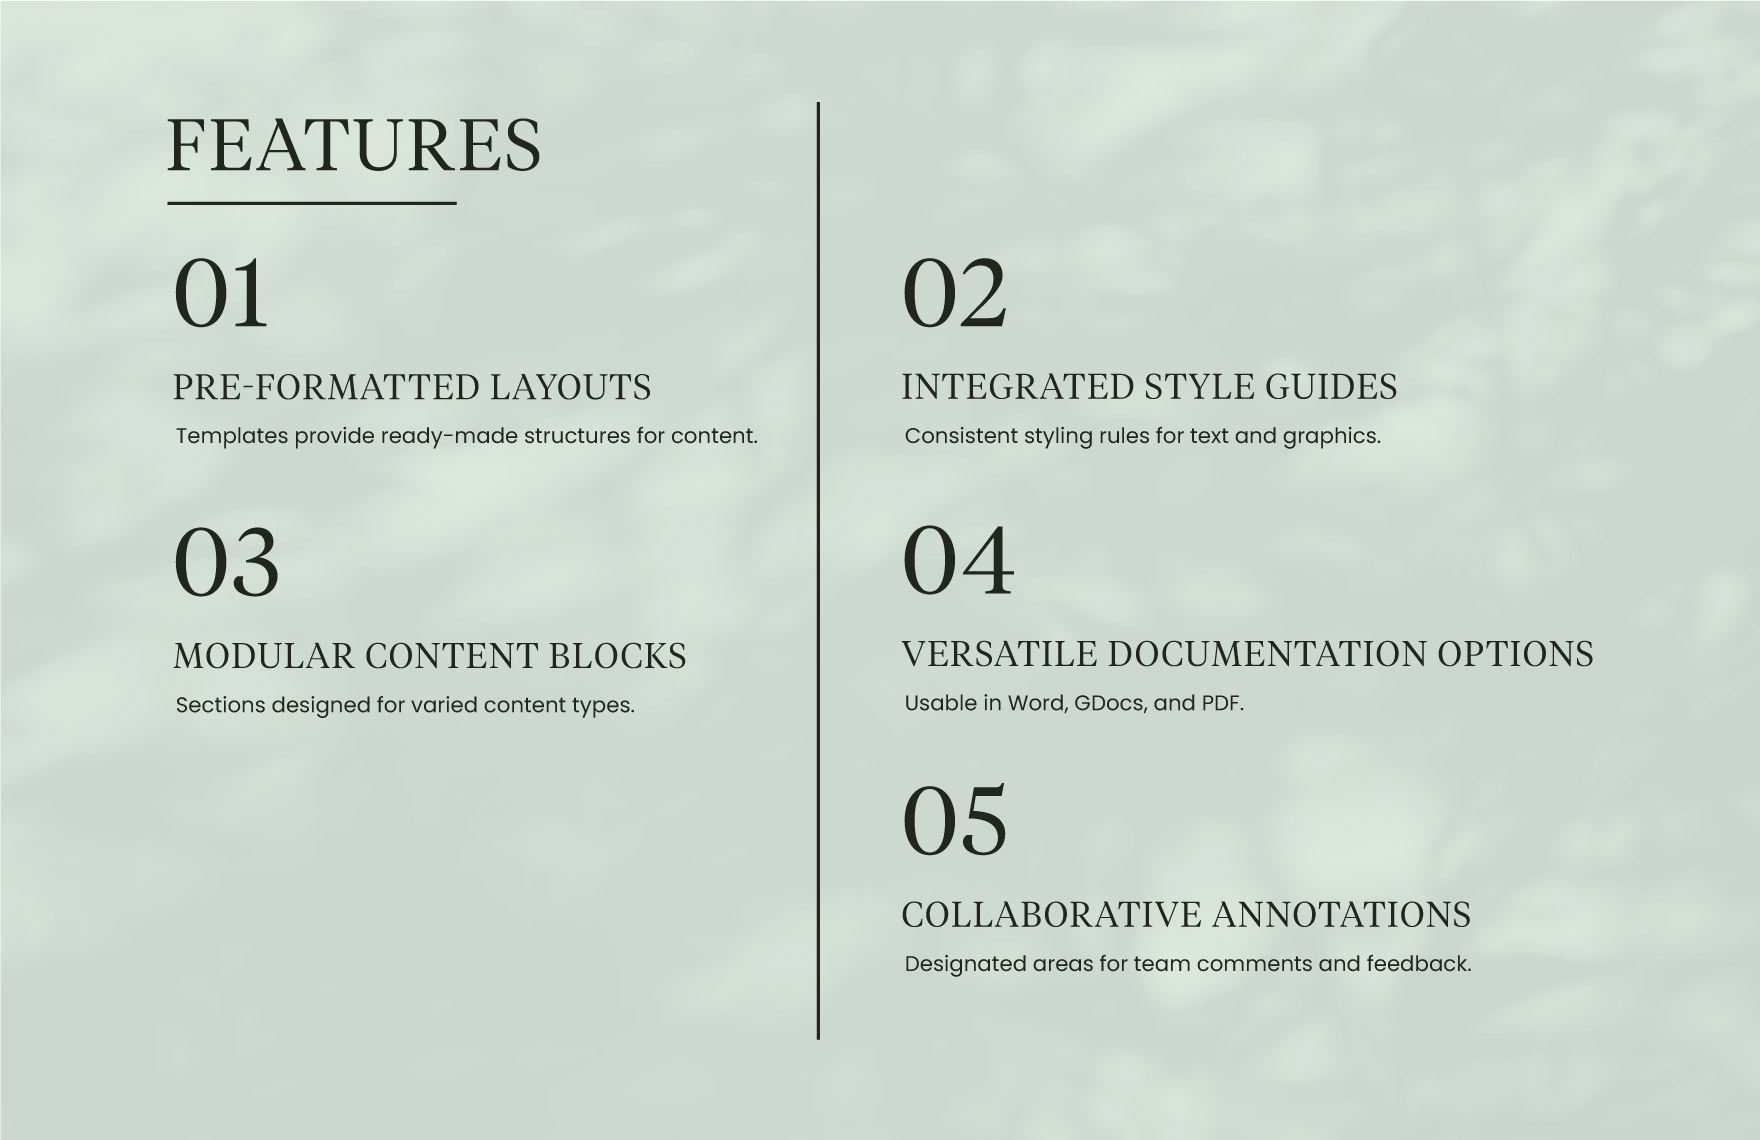 School Content Style Guide Template